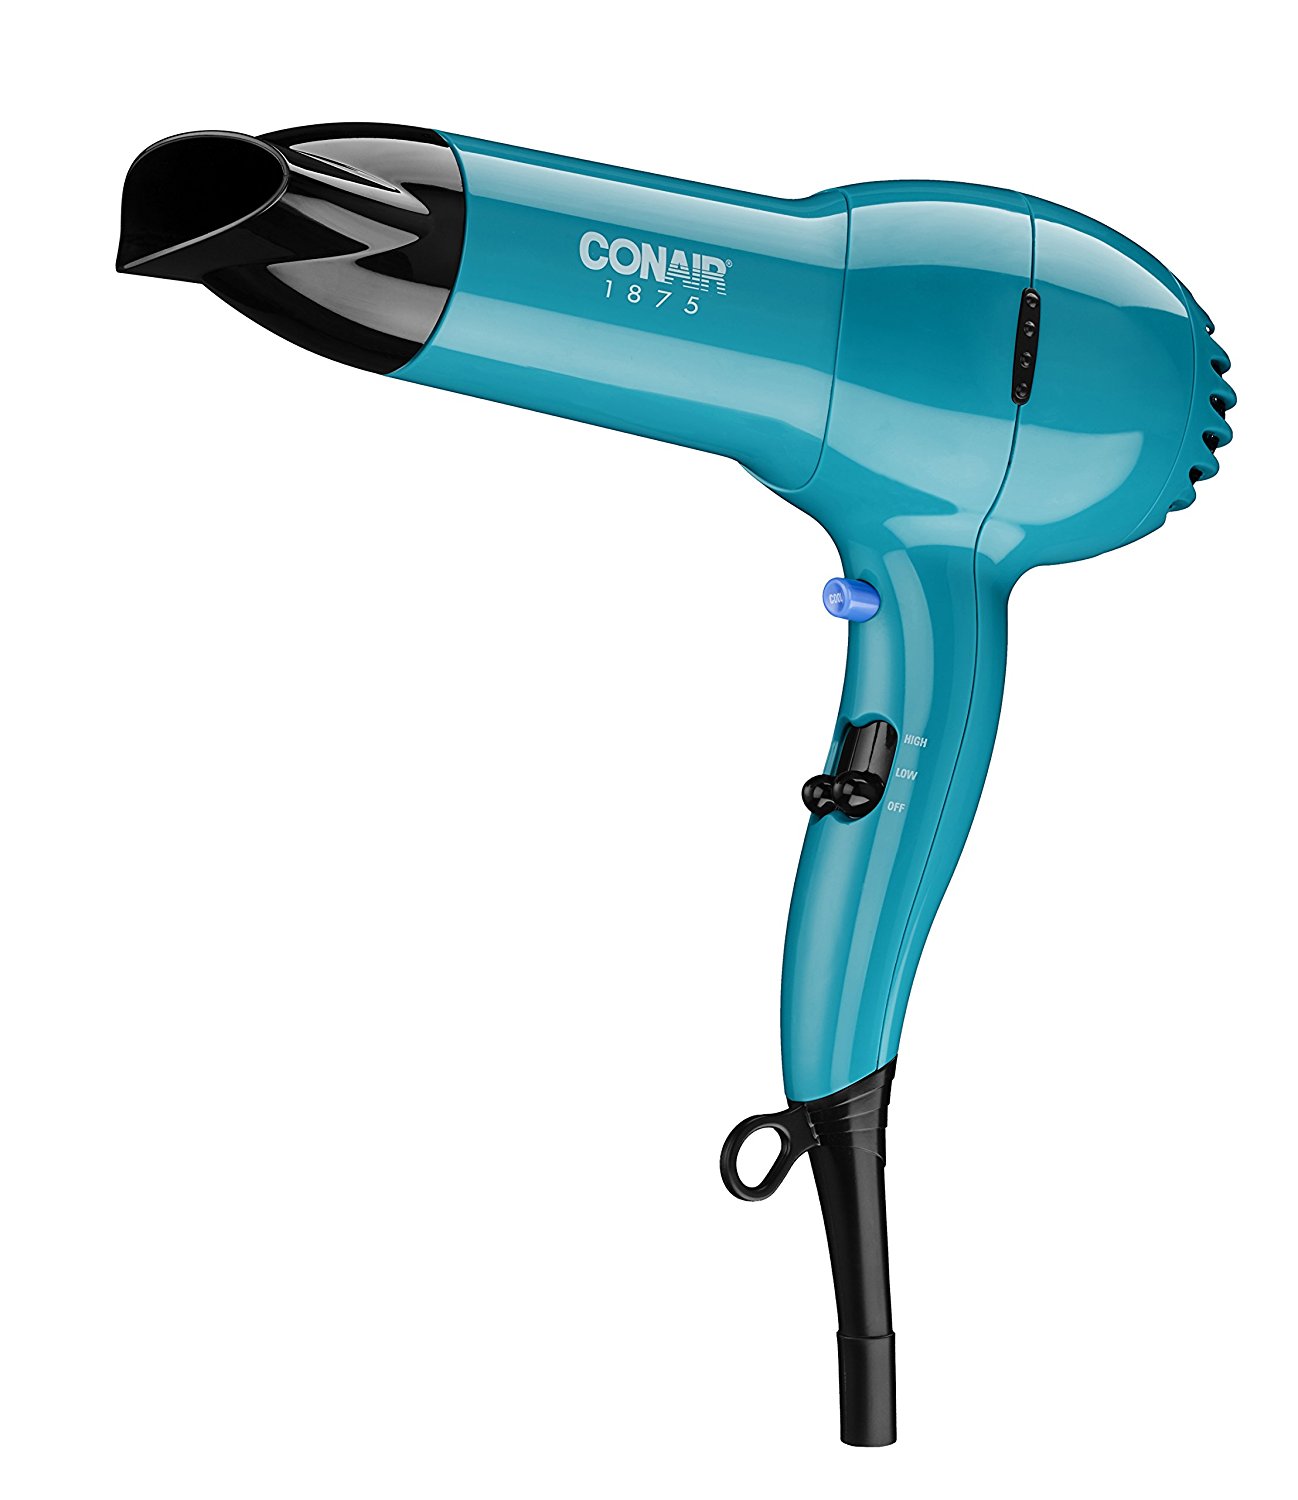 Conair 1875 Watt Full Size Pro Hair Dryer with Ionic Conditioning; Teal - Amazon Exclusive - Hair Dryer for Men